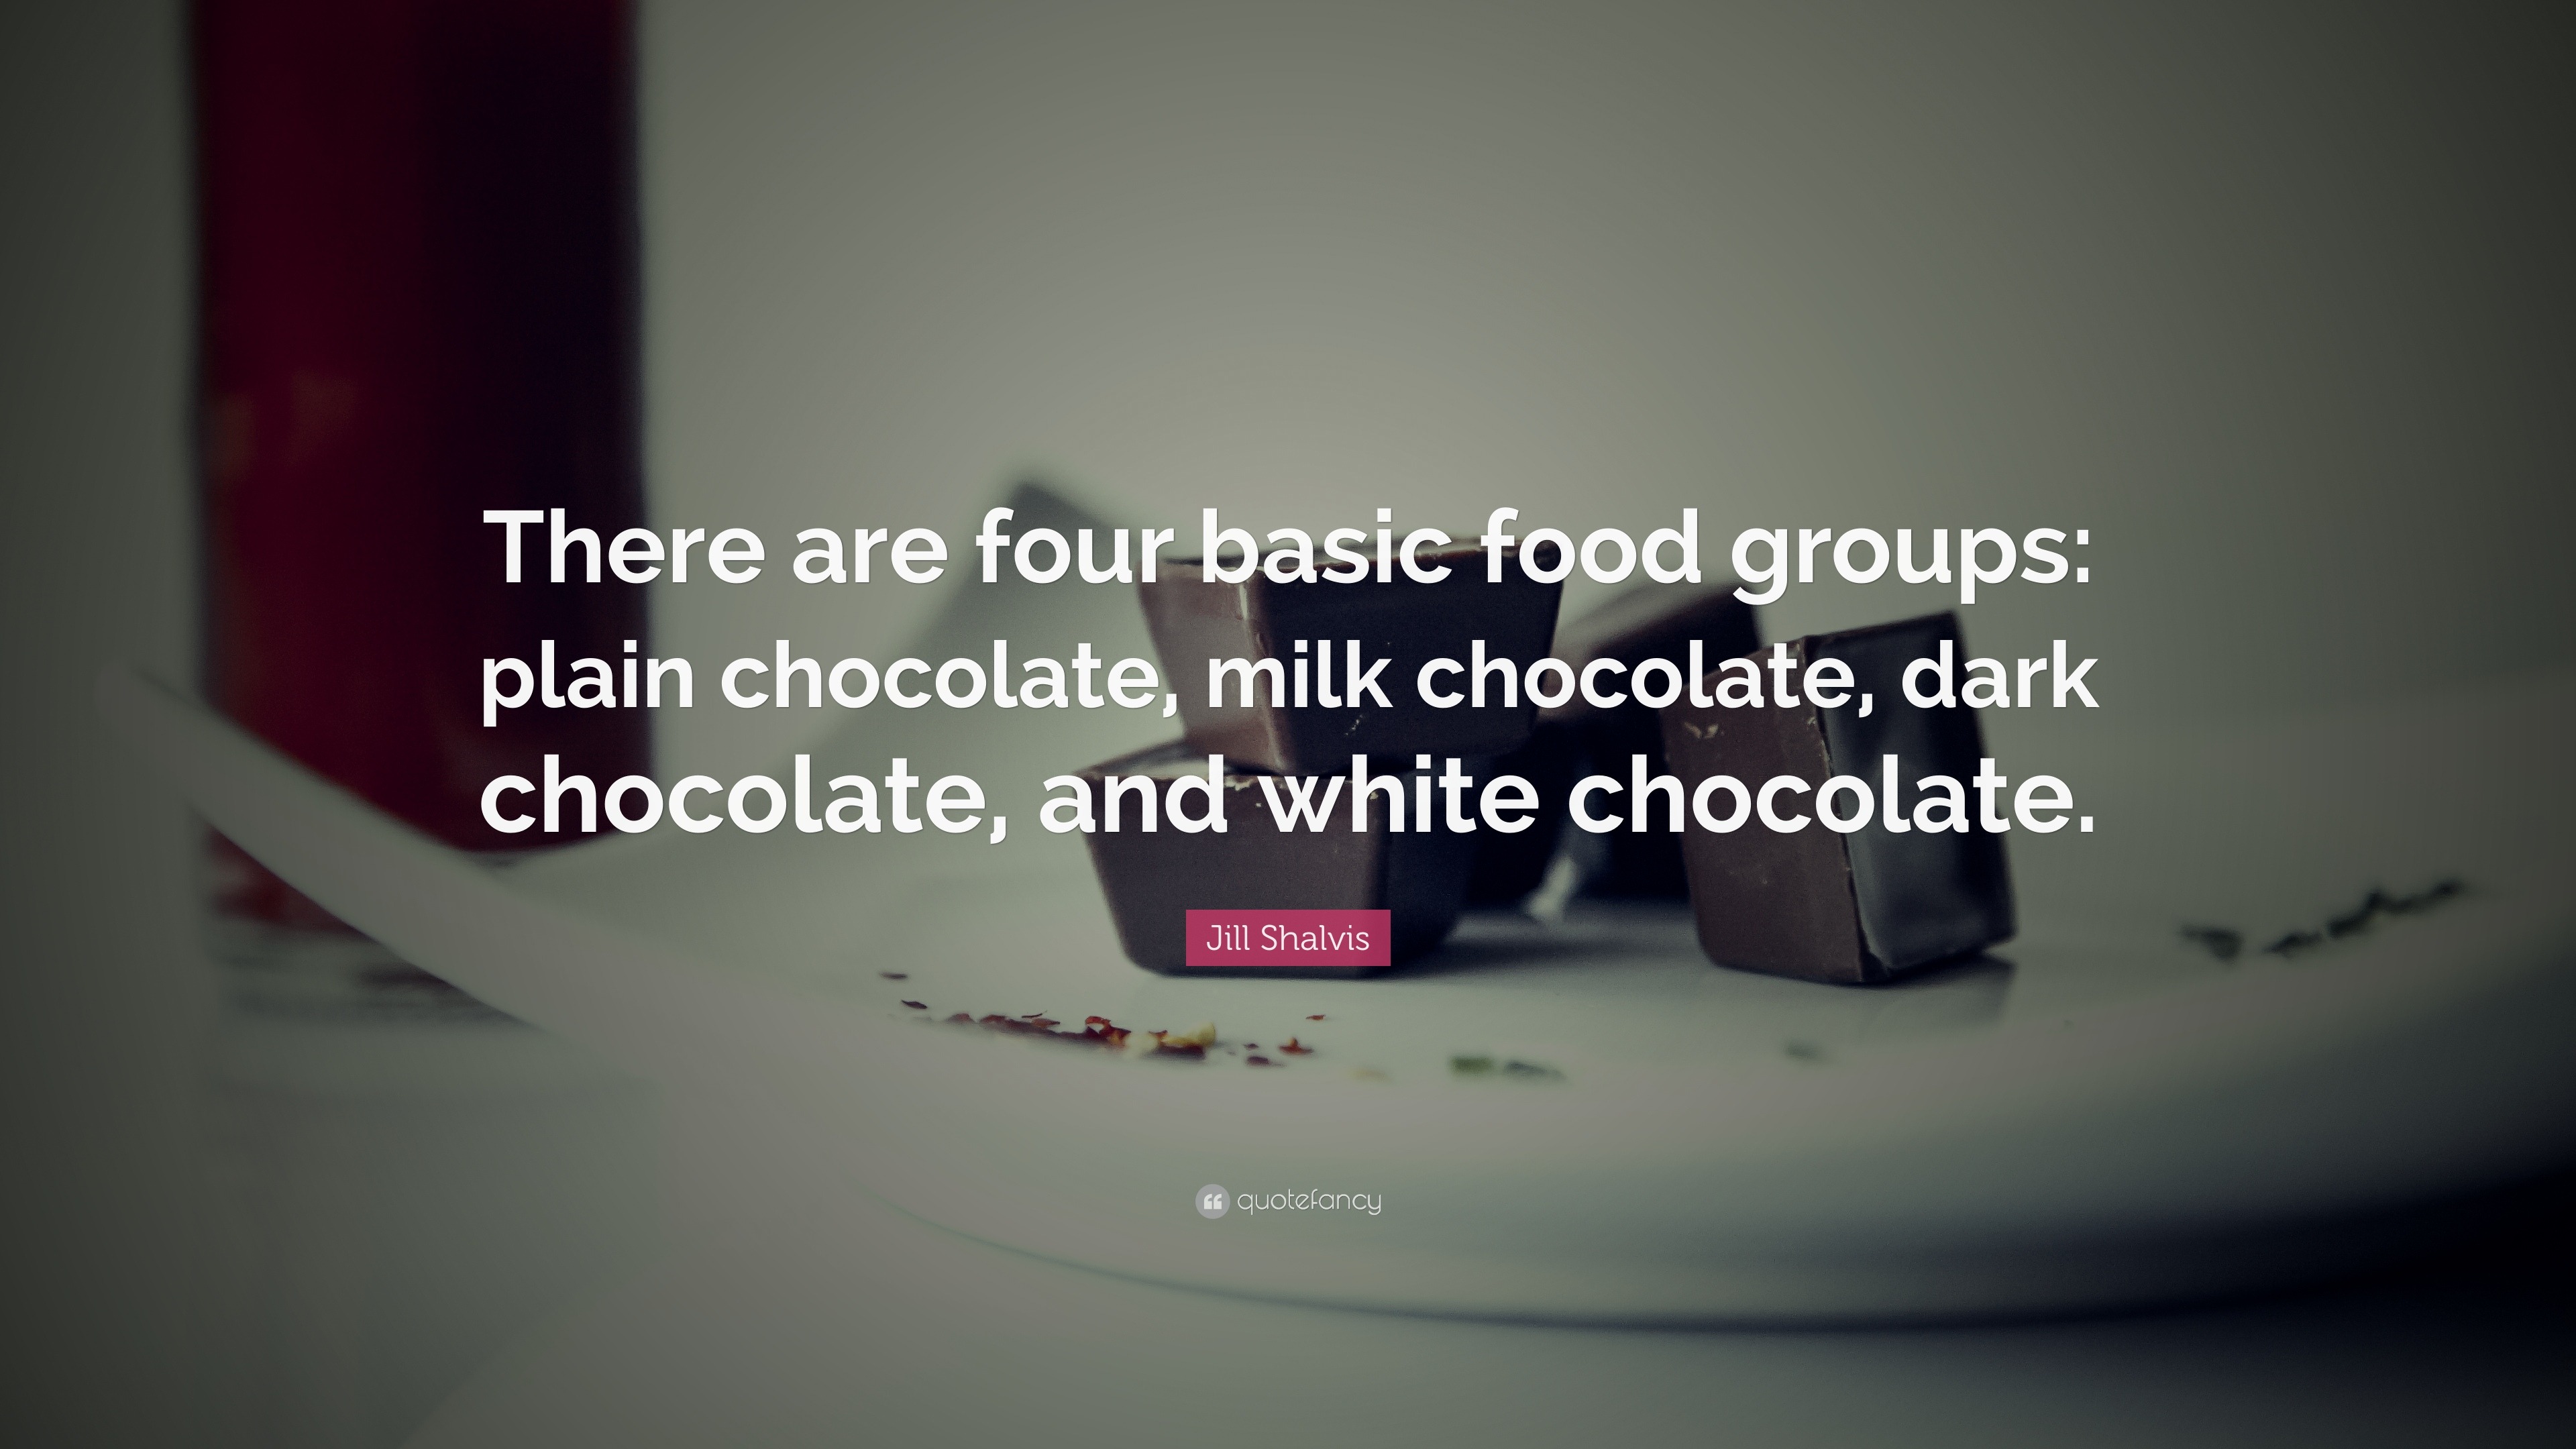 Jill Shalvis Quote “There are four basic food groups plain chocolate milk